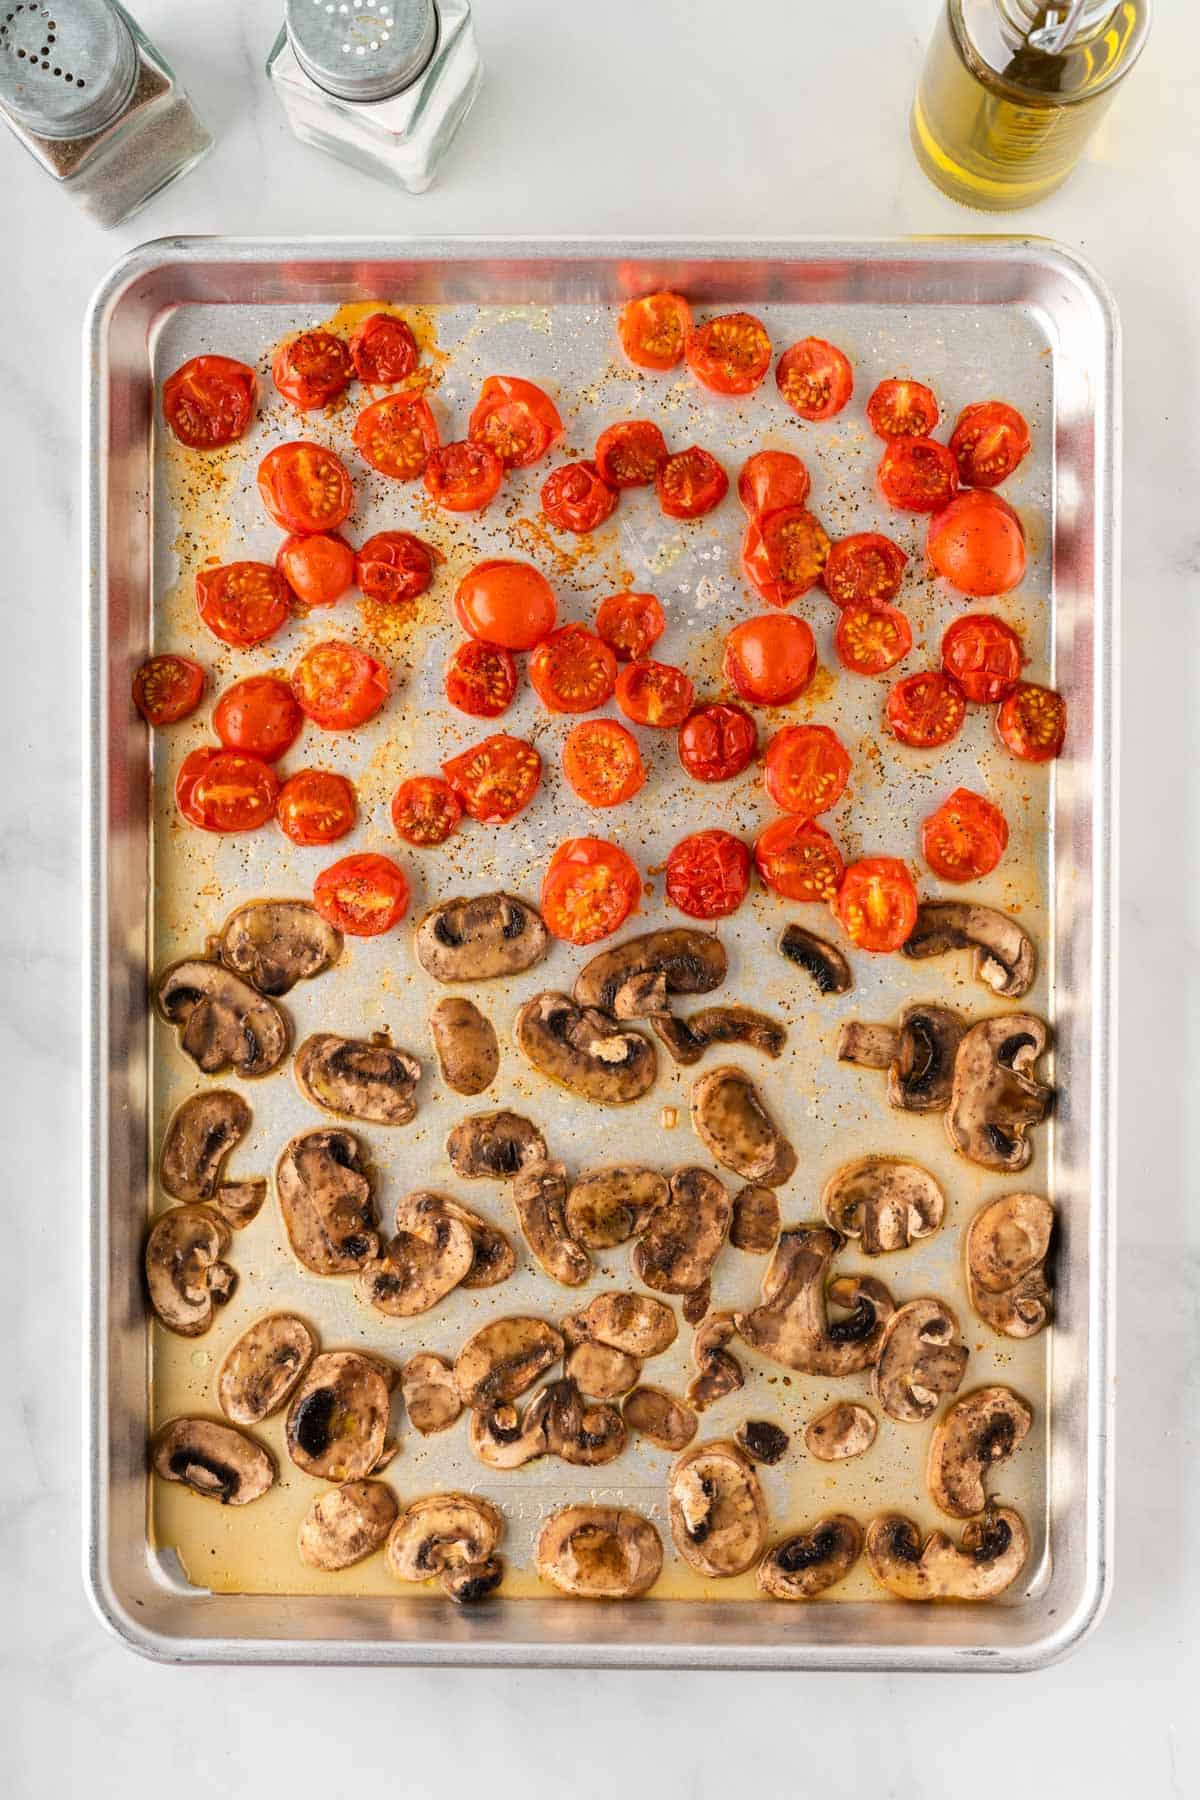 roasted mushrooms and tomatoes on a baking sheet